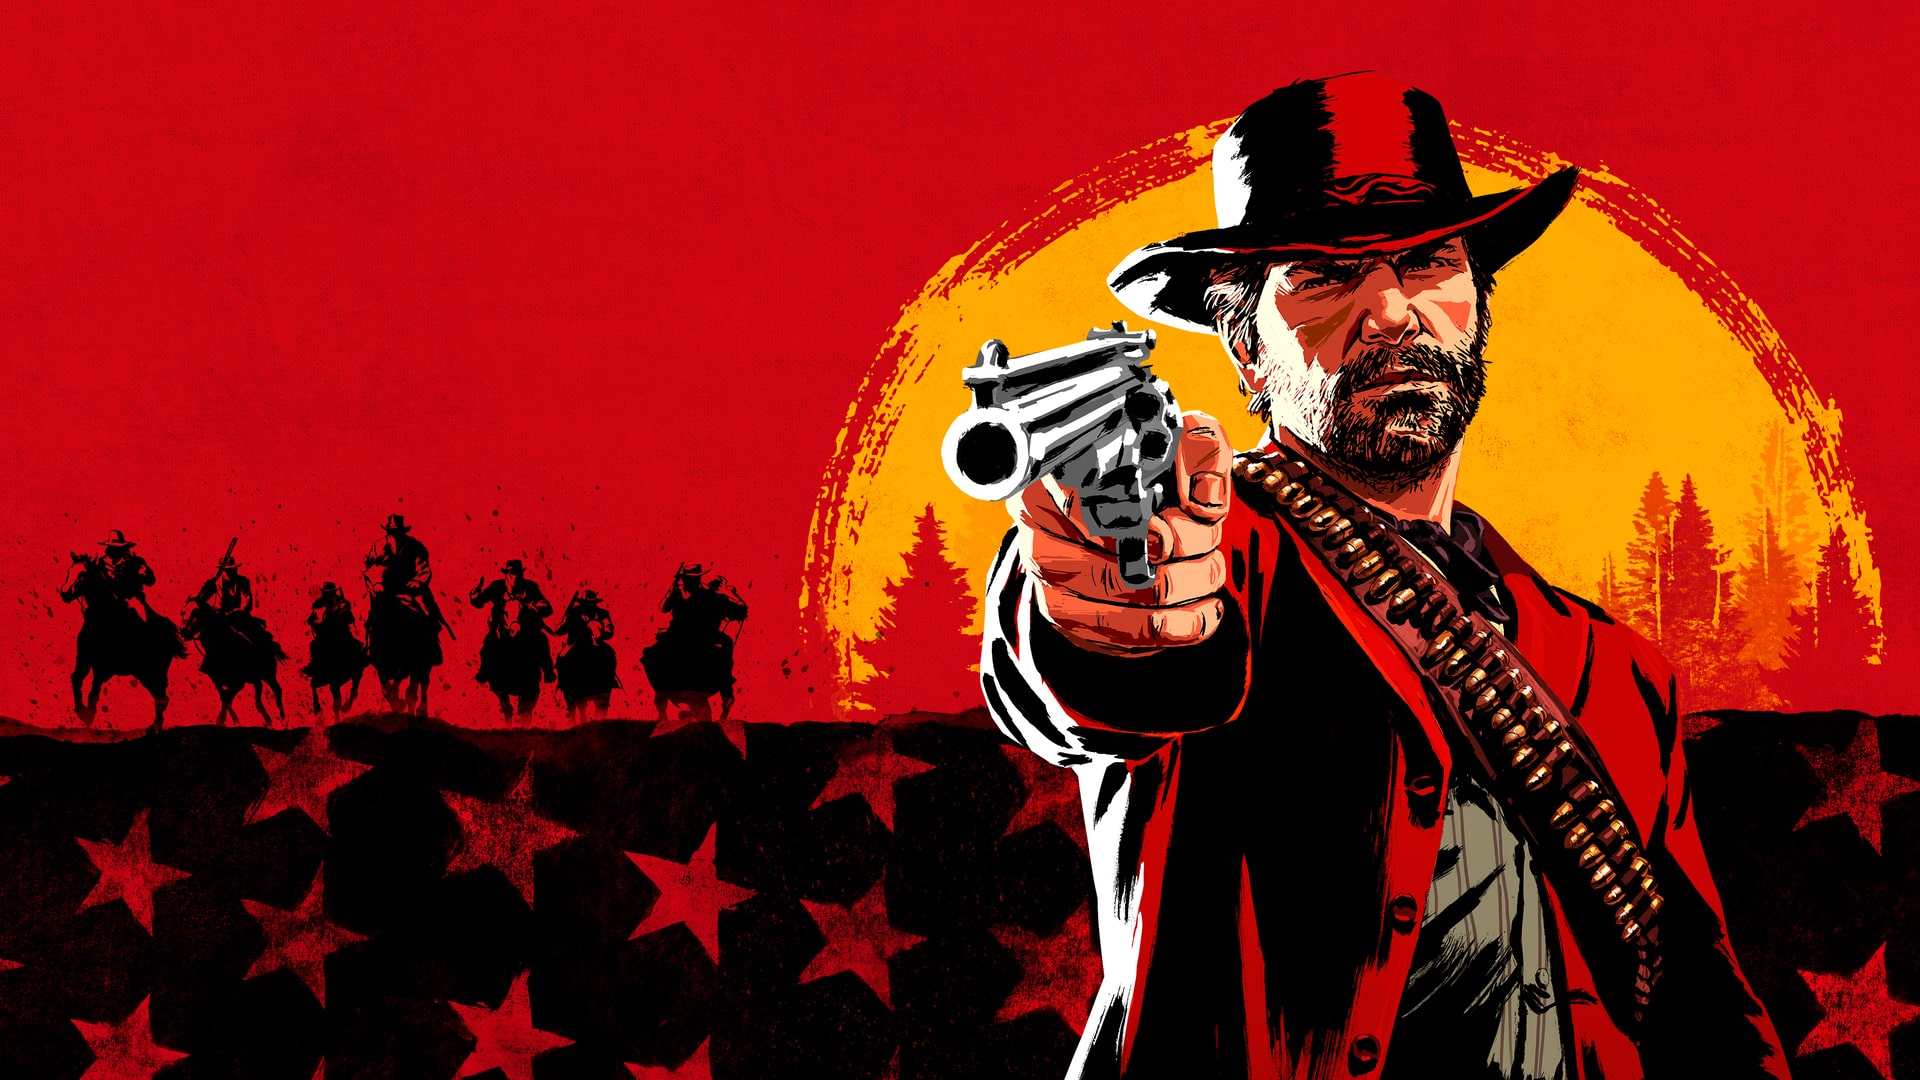 red redemption 2 playstation store